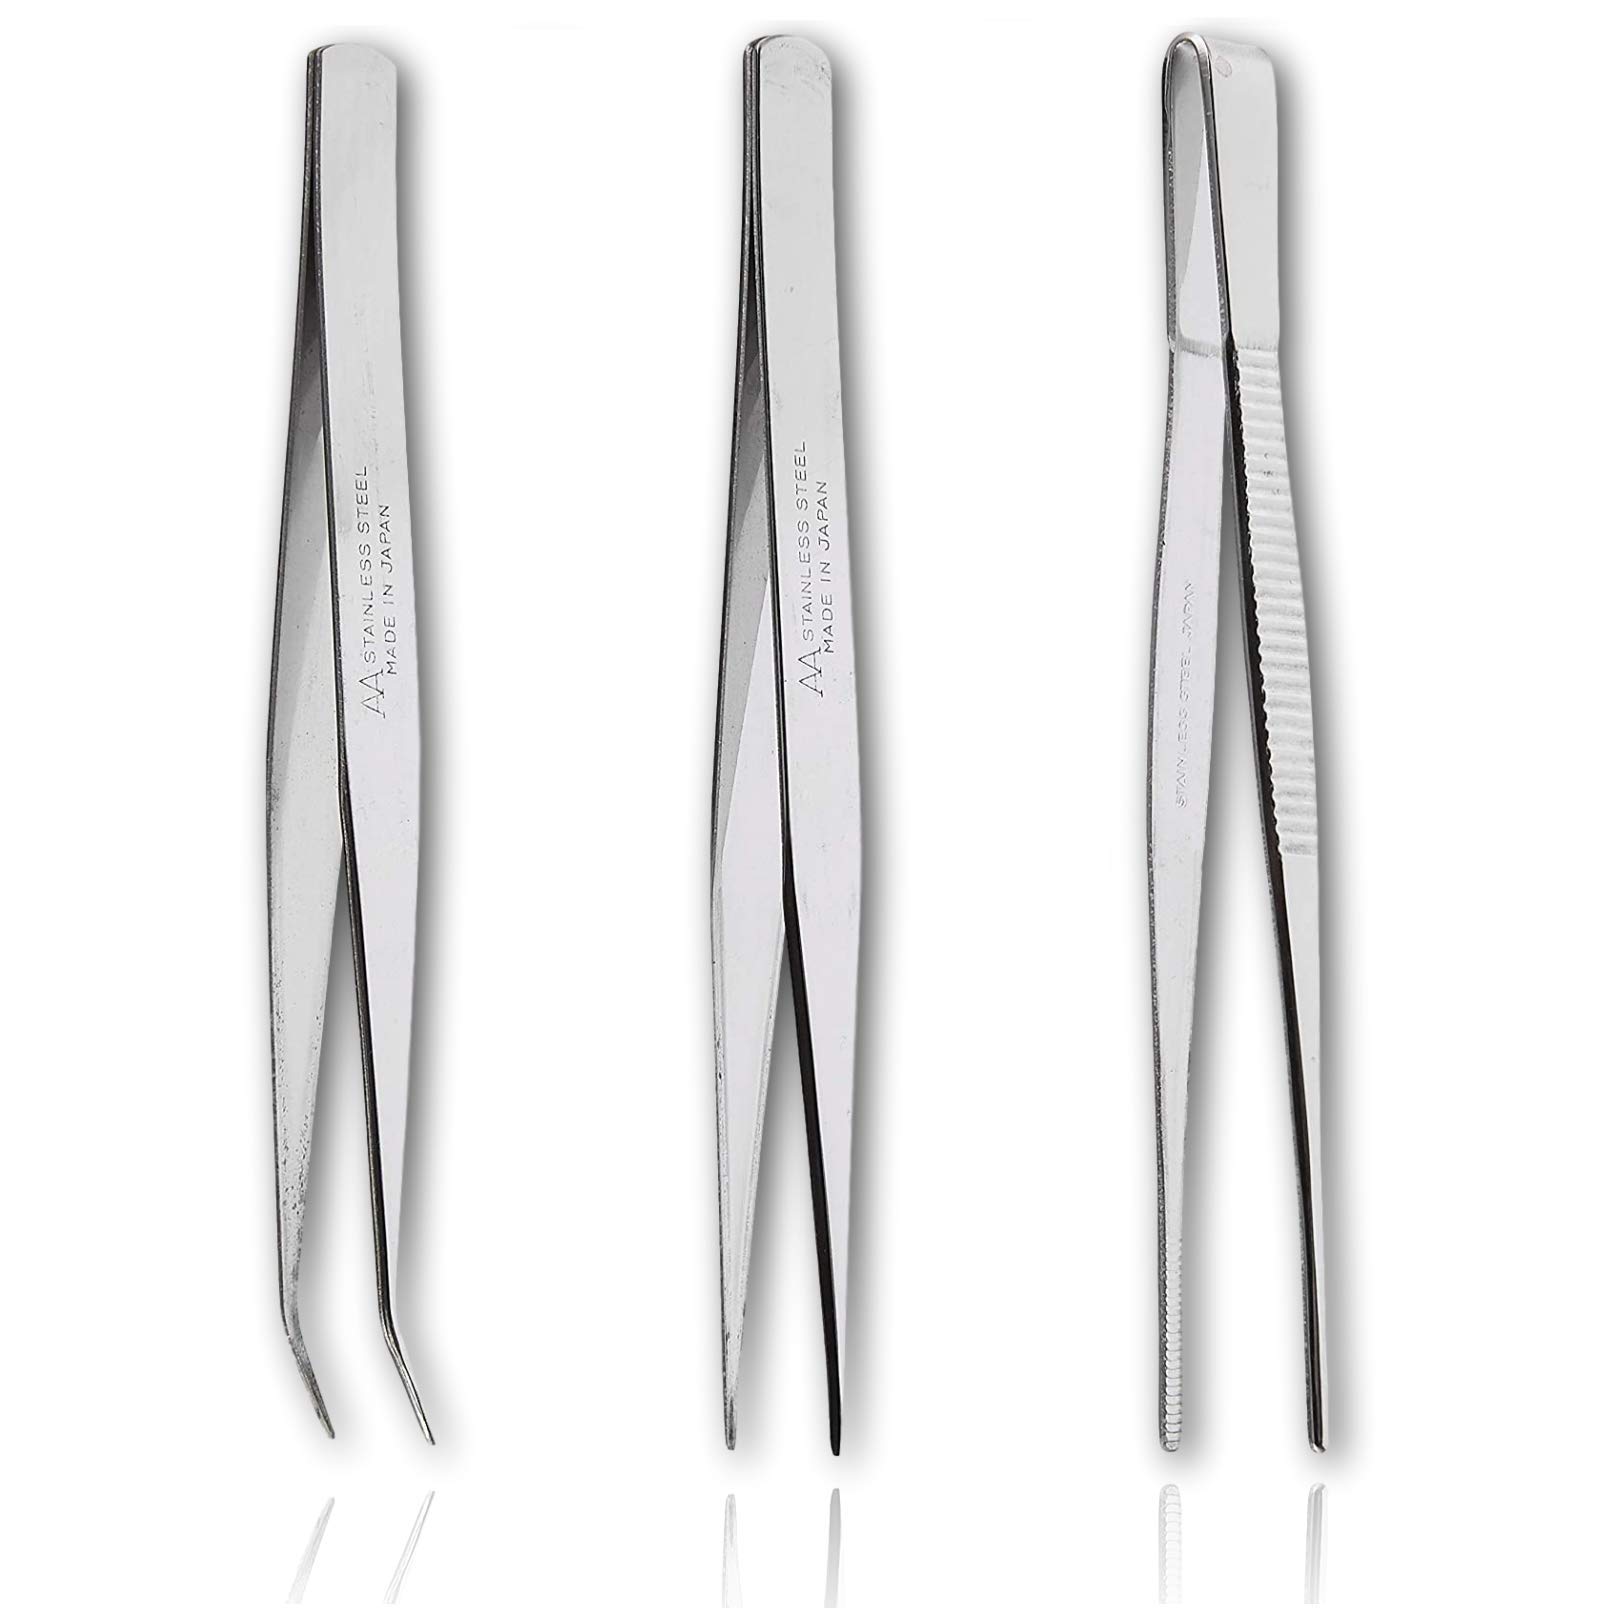 ALLEX Japanese Craft Tweezers Precision Fine Point Tips (Straight), Made in  JAPAN, Pointy Tweezers for Crafting, Hobby, Jewelry Detail Work, Japanese